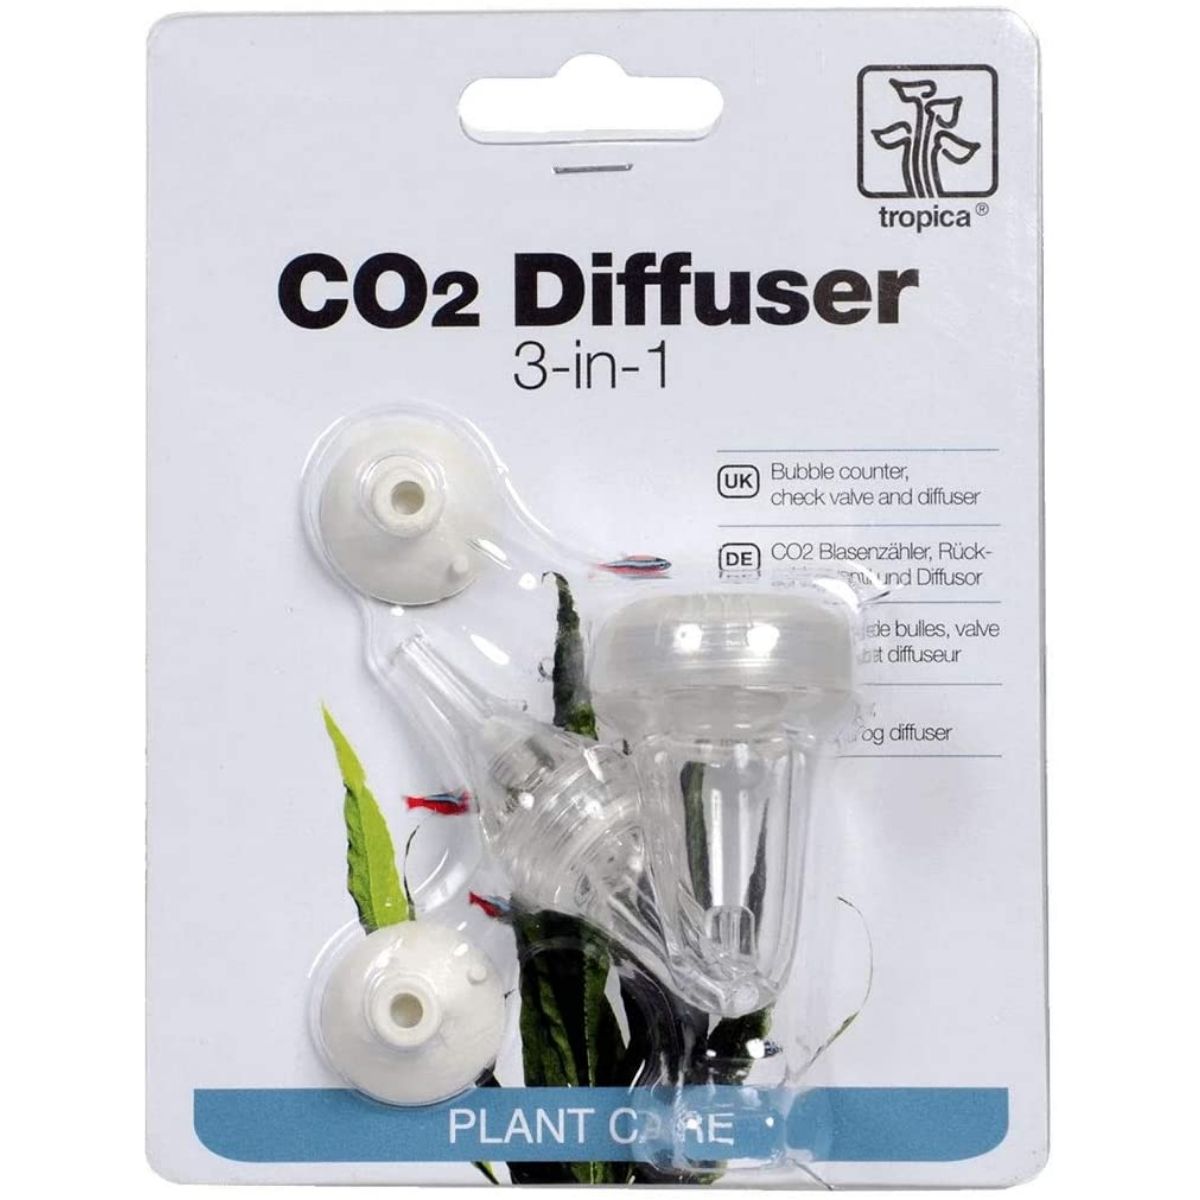 The Best CO2 Diffusers Option: Tropica CO2 Diffuser